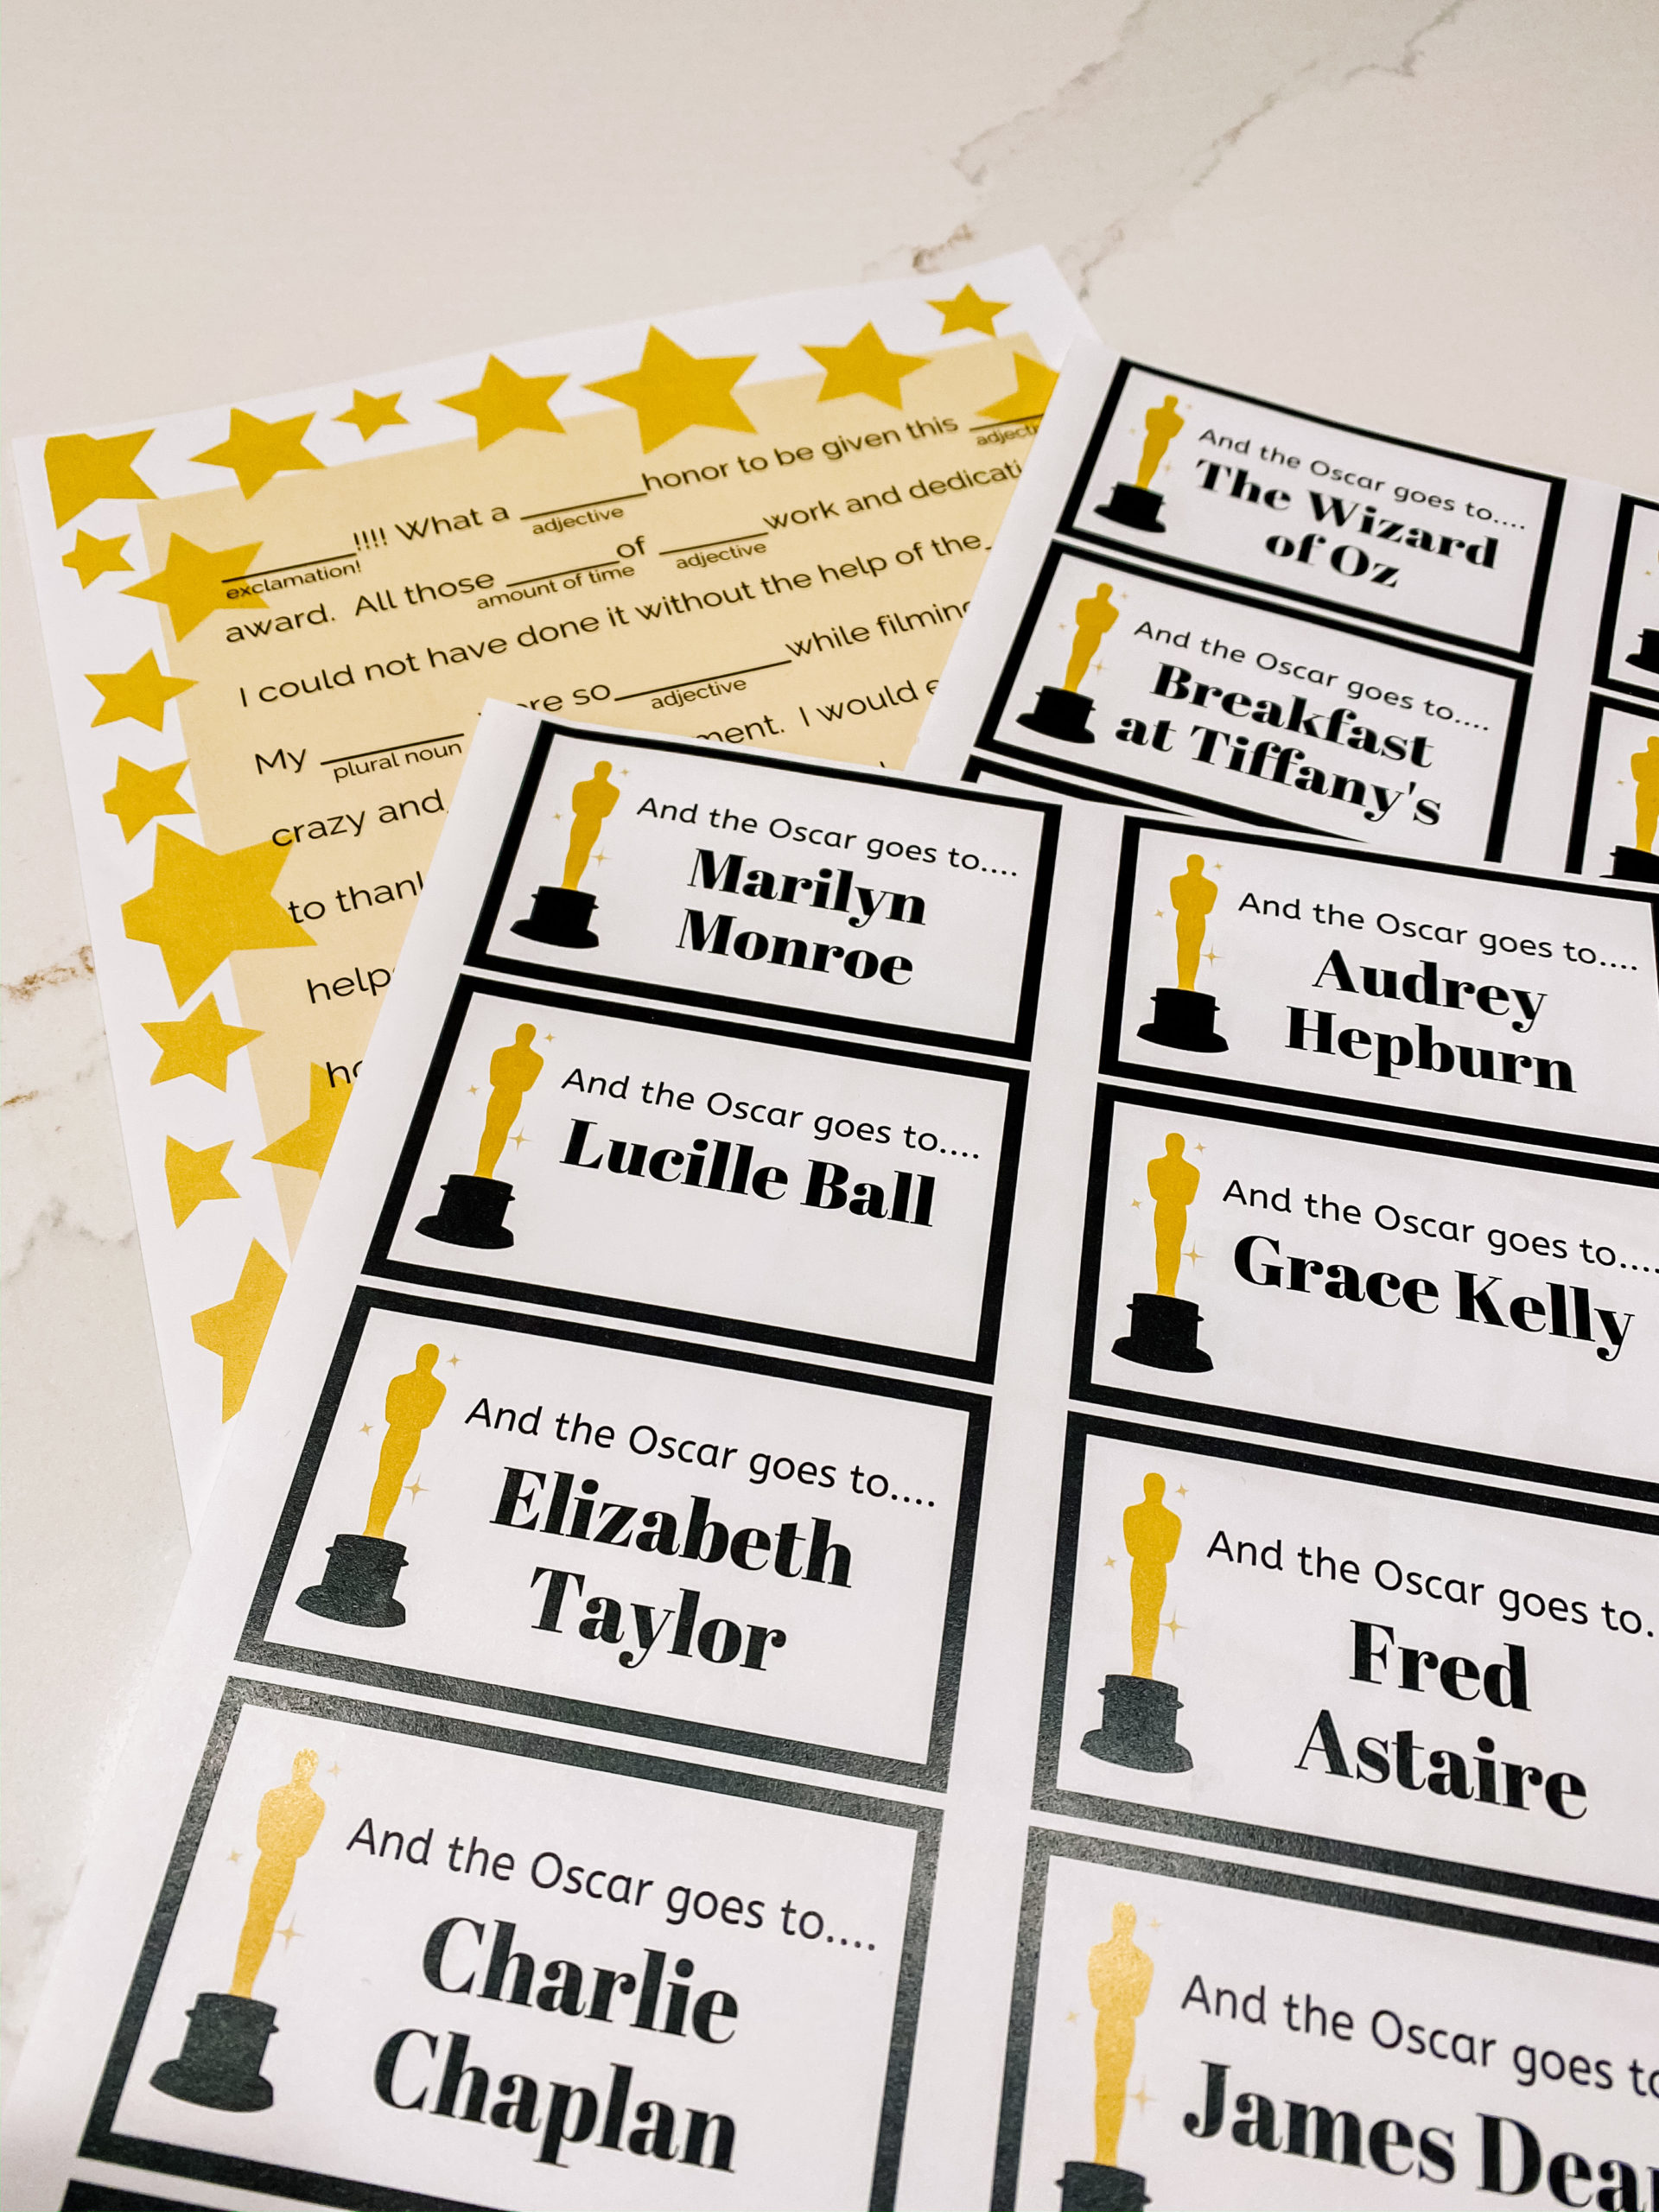 Free Downloads! Charades and Mad-libs style speech for Oscar party.